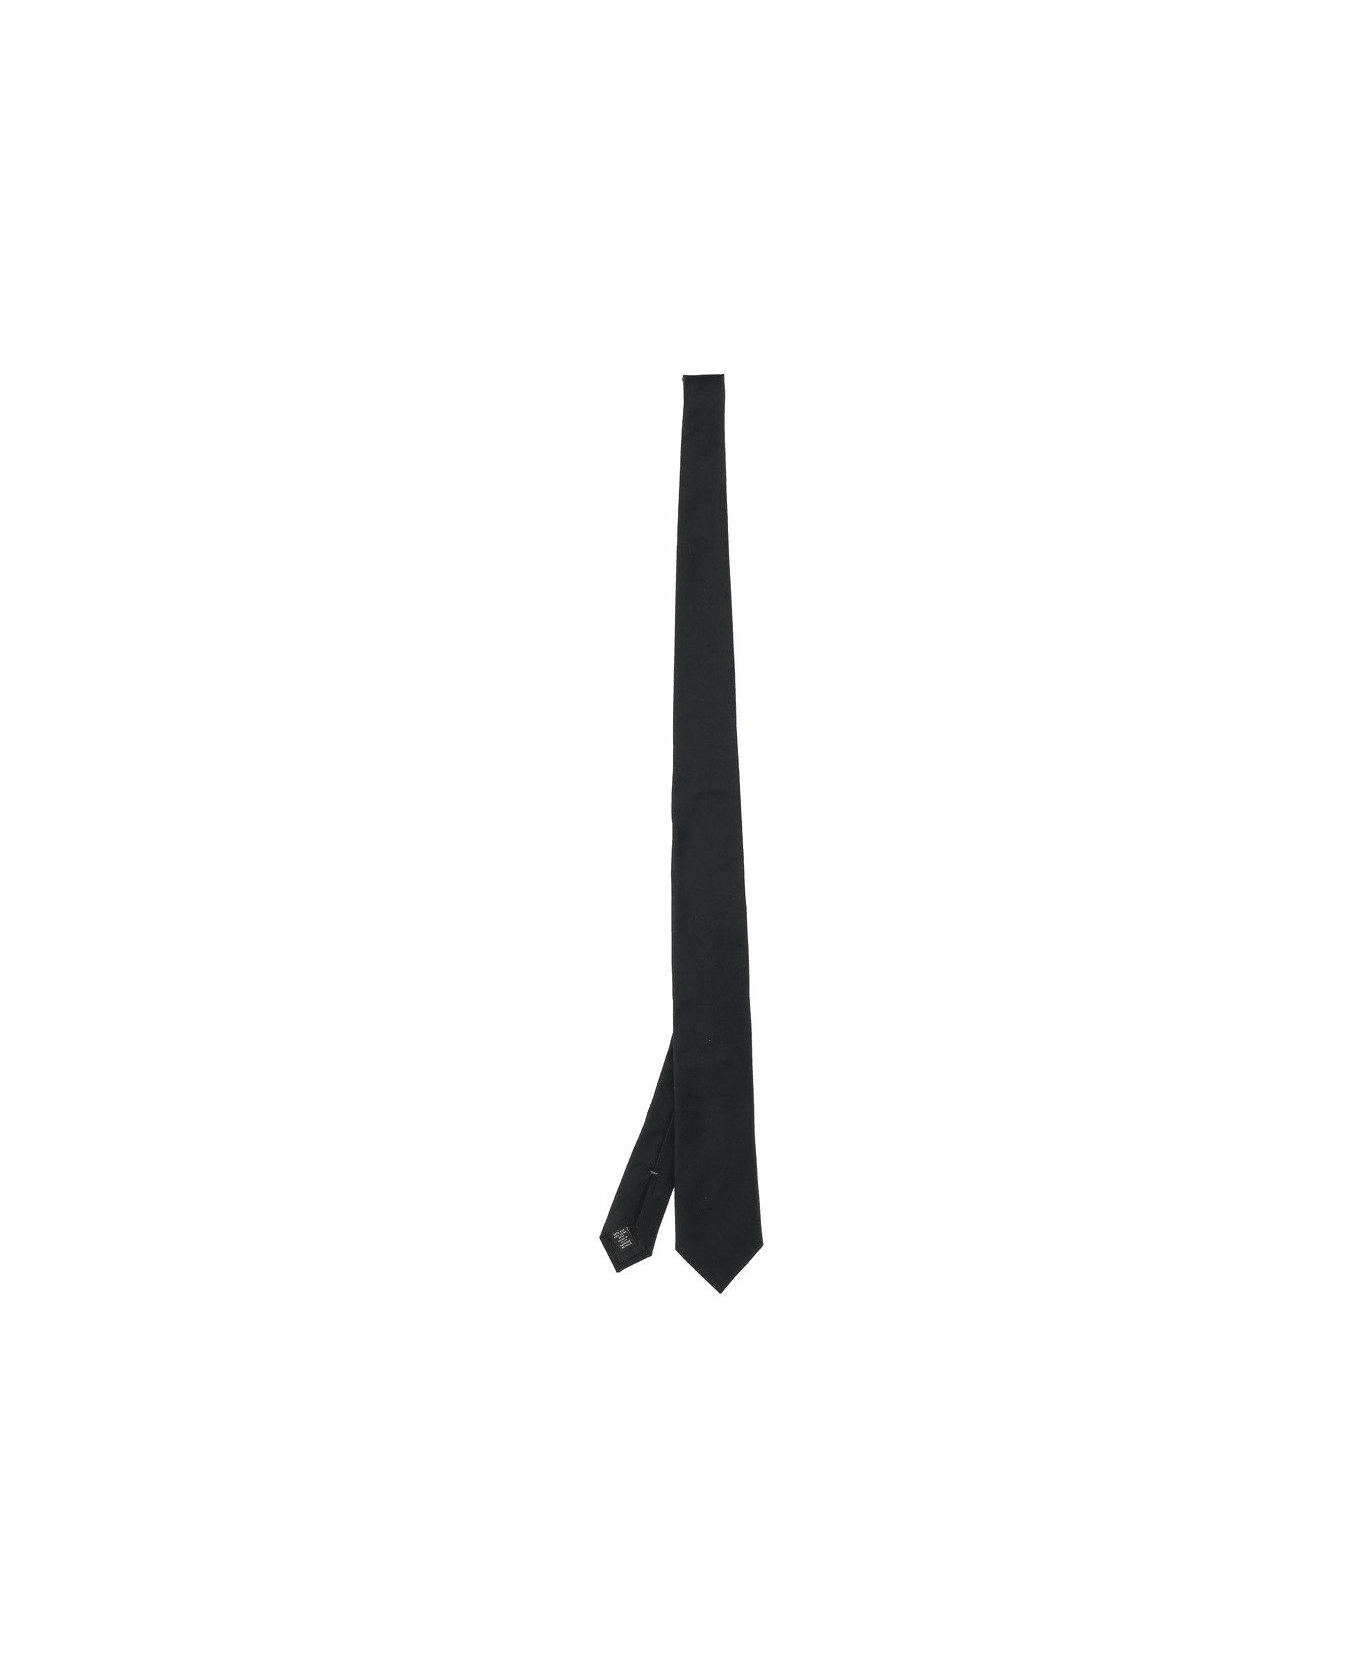 Zegna Pointed Tie